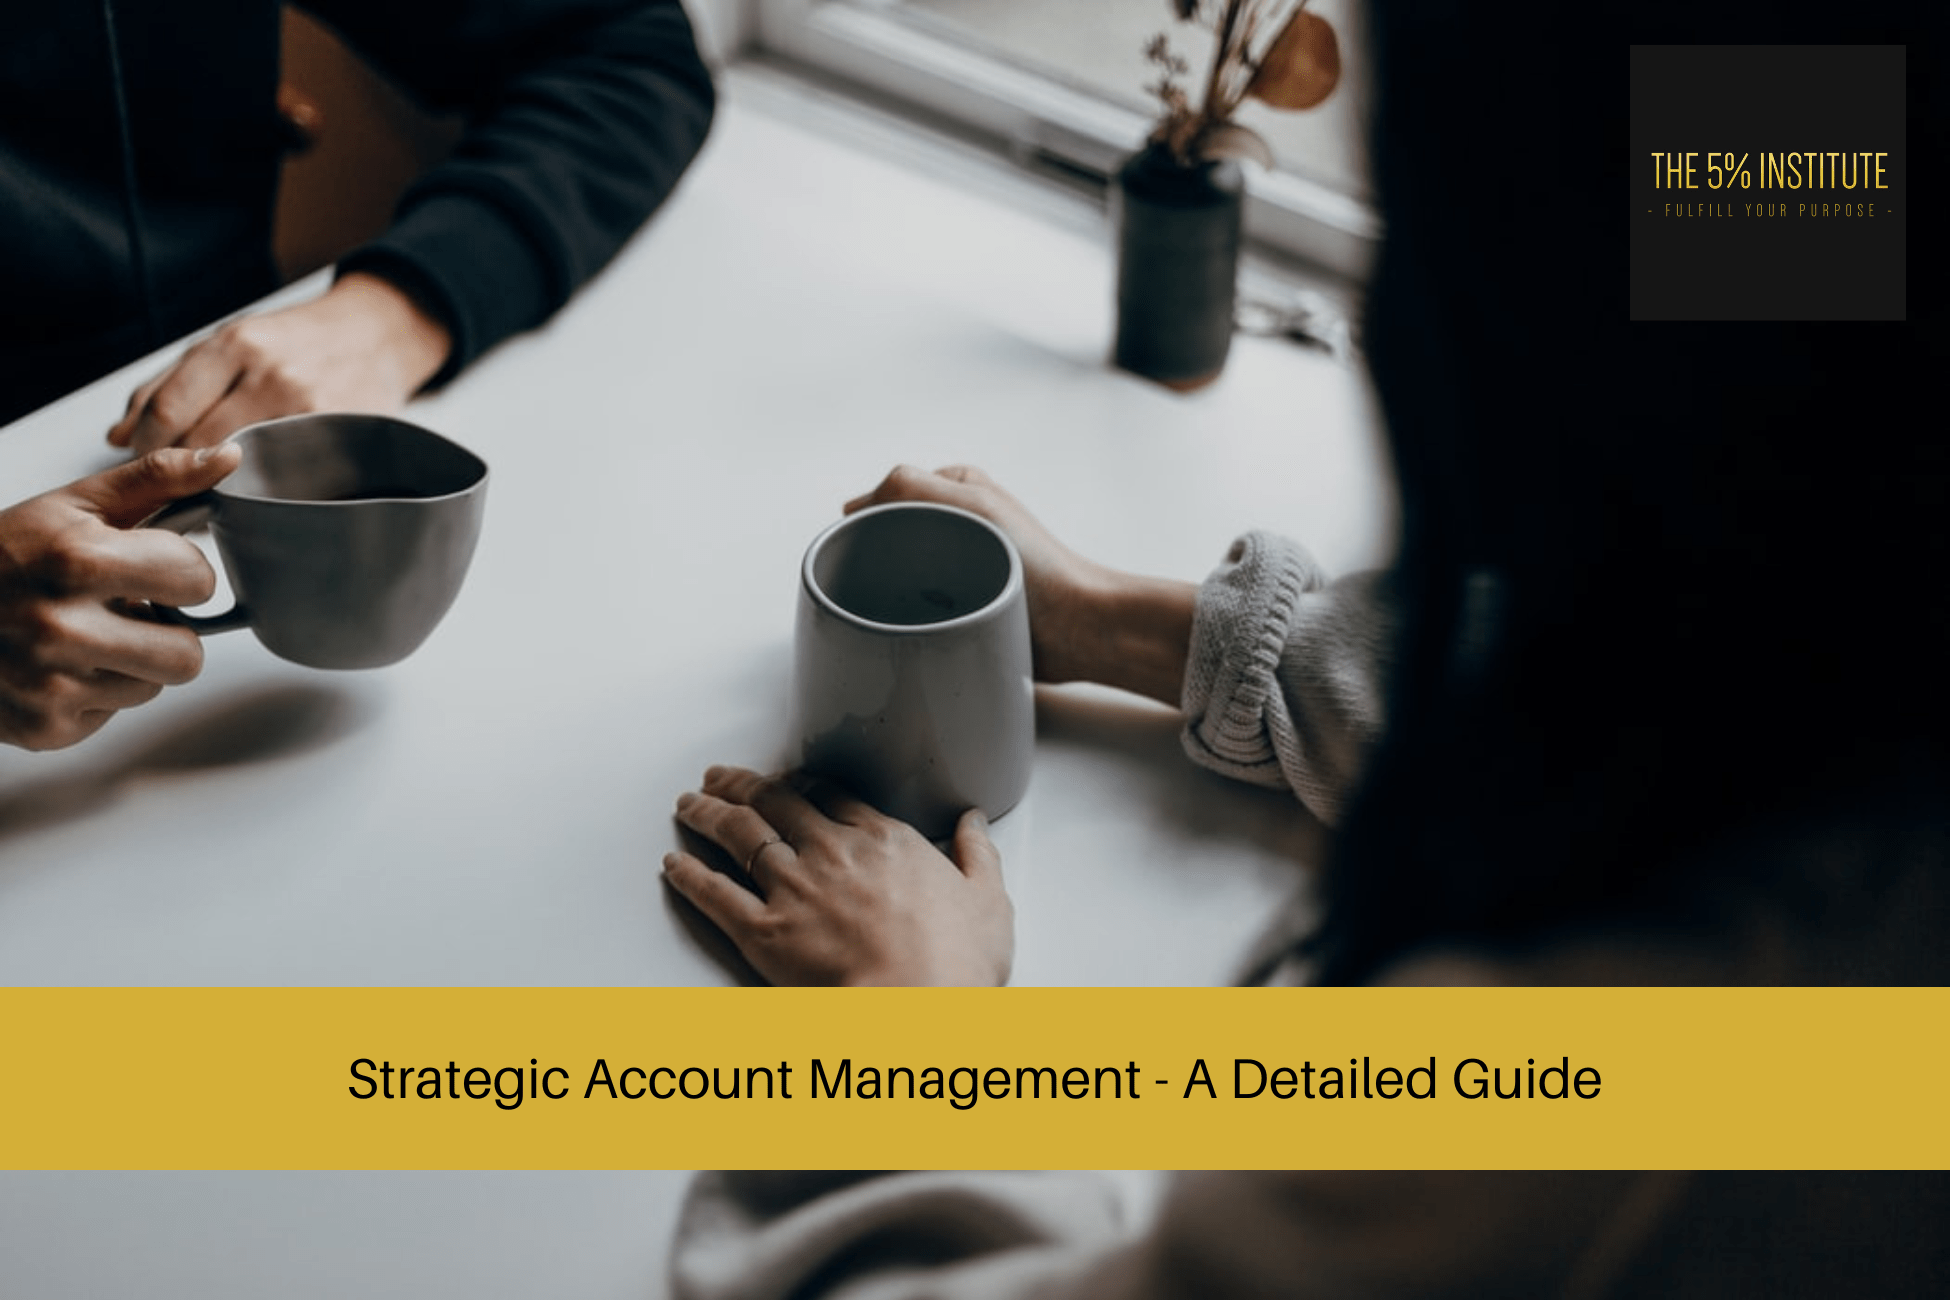 Strategic Account Management - A Detailed Guide